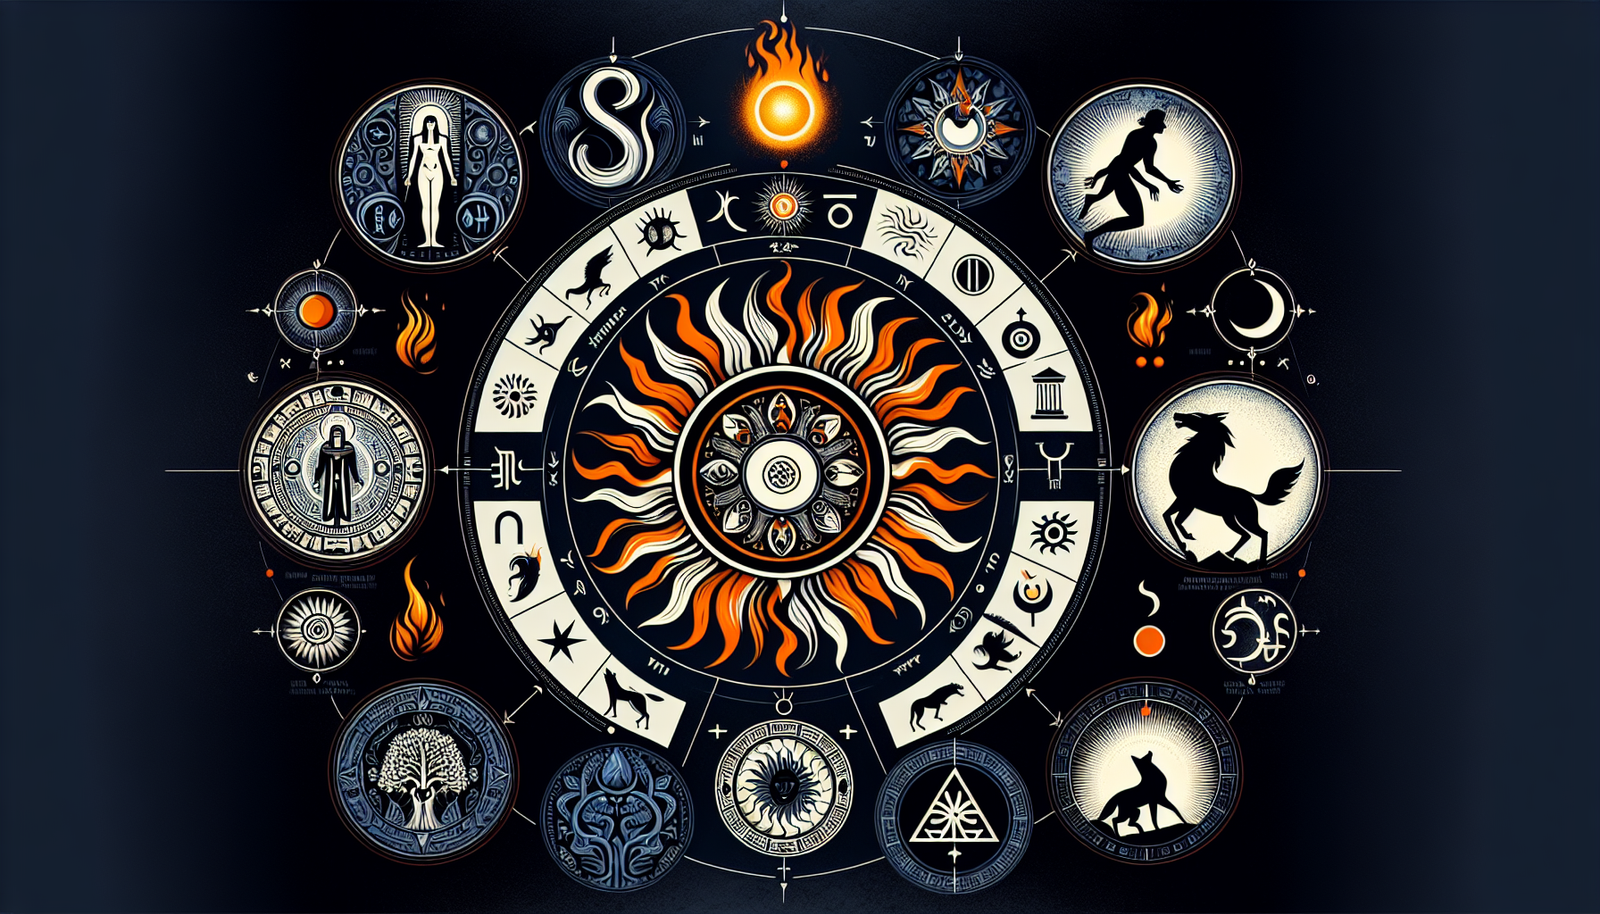 Mythology of the Sun in relation to Astrology